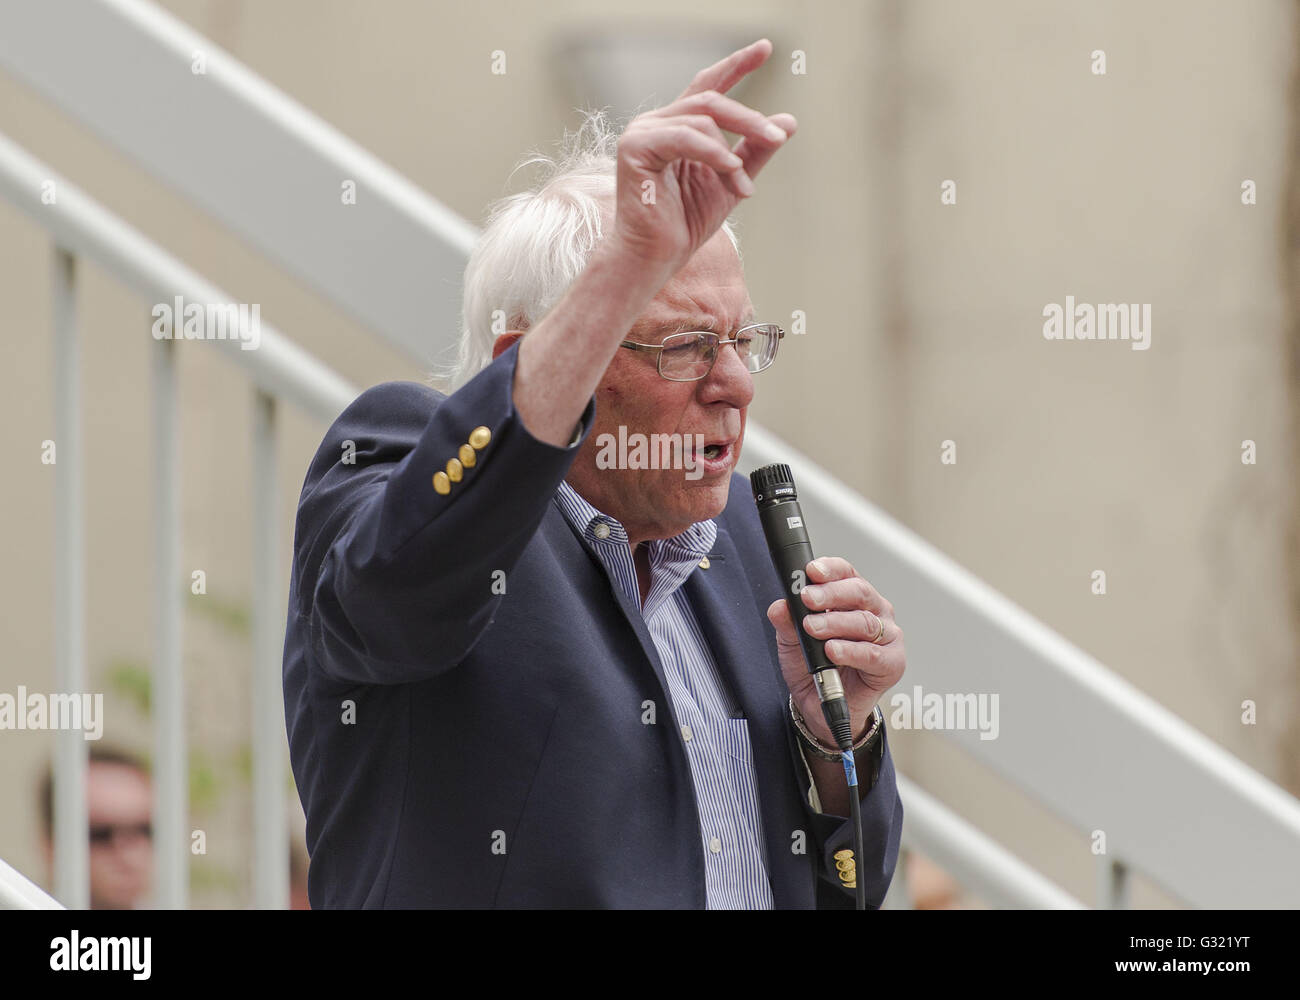 San Francisco, California, USA. 6th June, 2016. Vermont Sen. BERNIE SANDERS holds a rally at City College of San Francisco's Mission Center, one of several scheduled campaign events less than 24 hours before polls open in the delegate-rich Democratic California primary election. Credit:  PJ Heller/ZUMA Wire/Alamy Live News Stock Photo